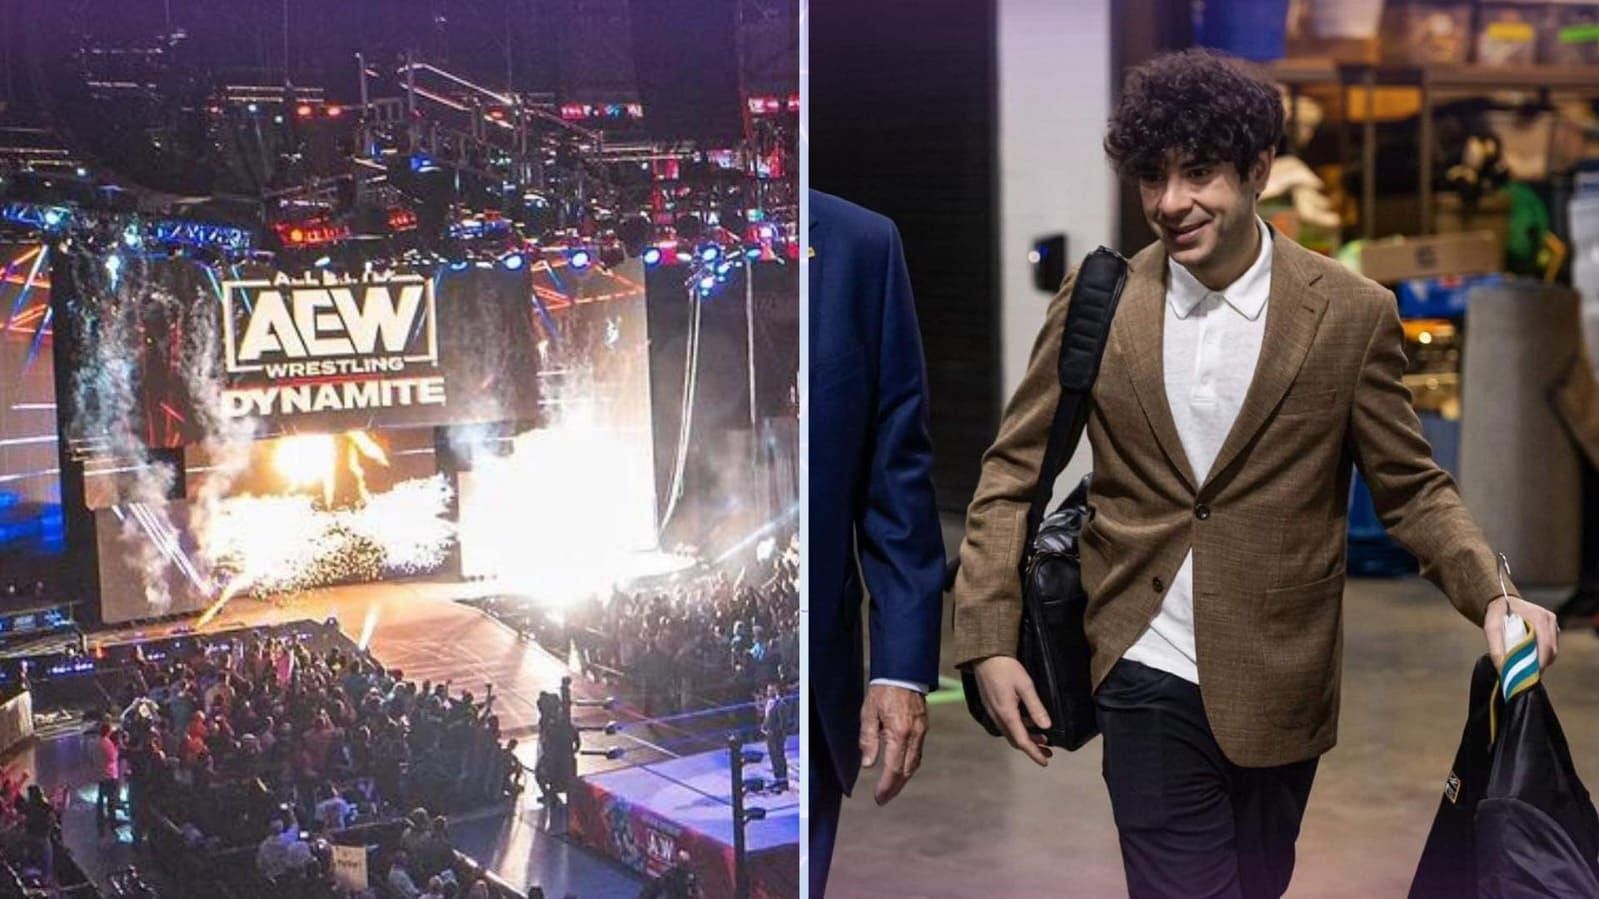 Tony Khan is CEO and GM of All Elite Wrestling